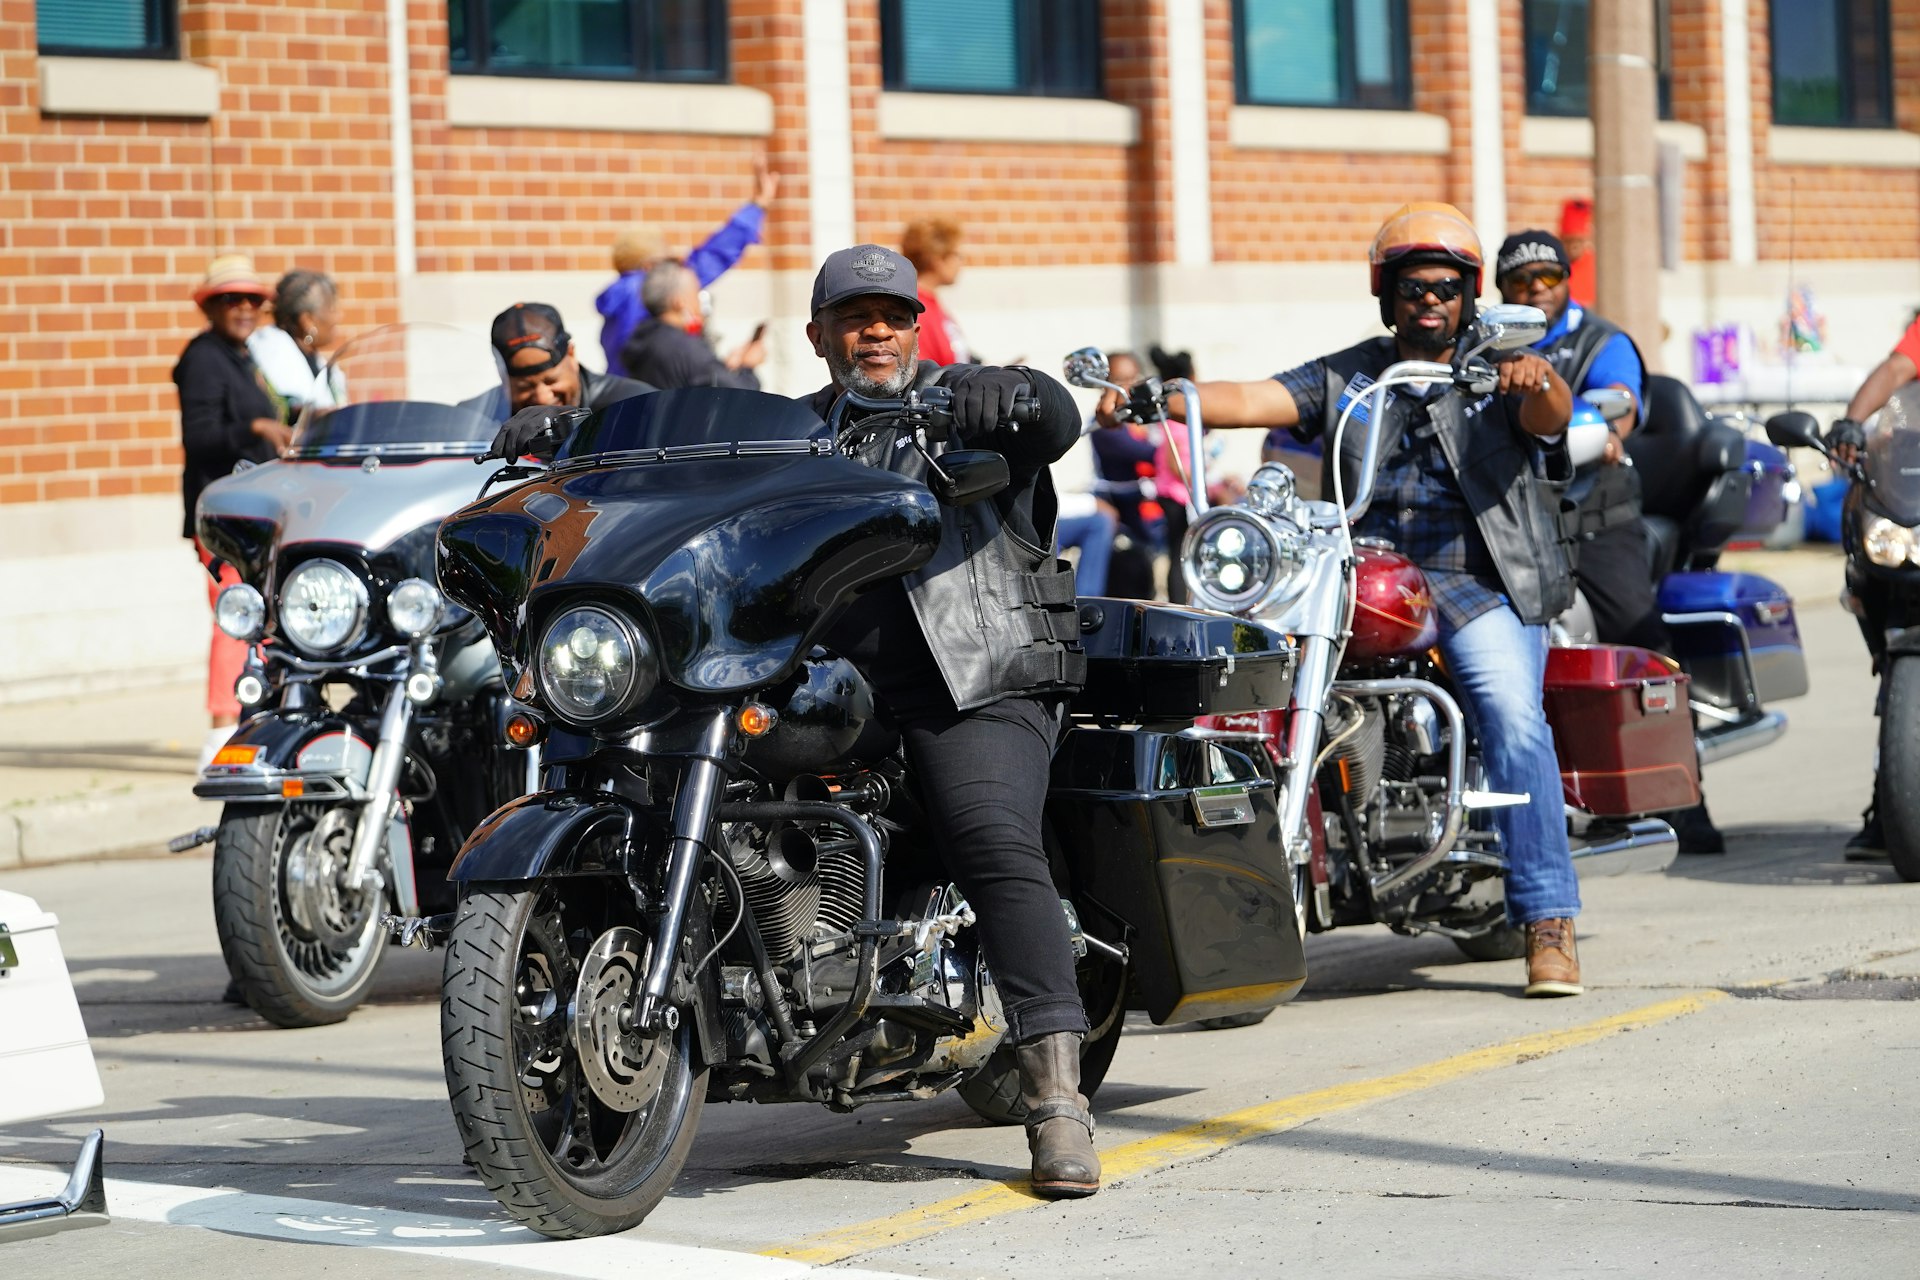 African America motorcycle enthusiasts in Milwaukee